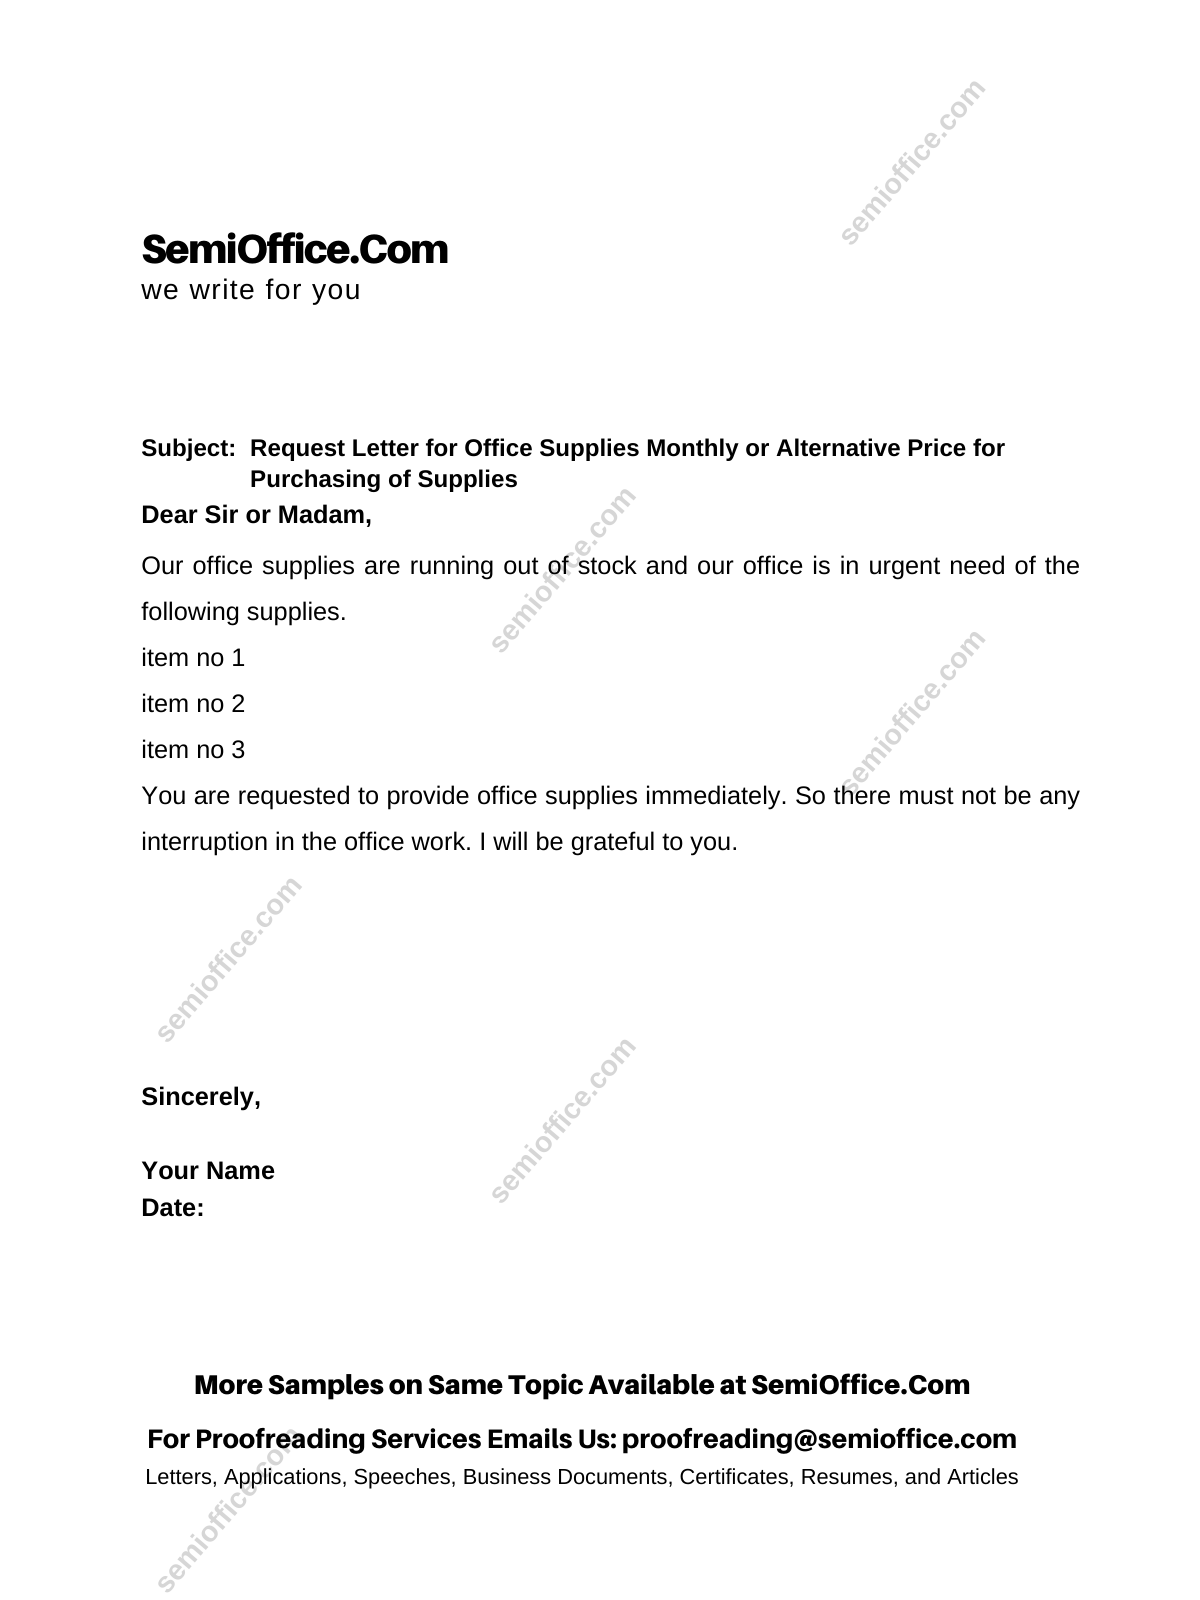 request-for-office-supplies-templates-semioffice-com